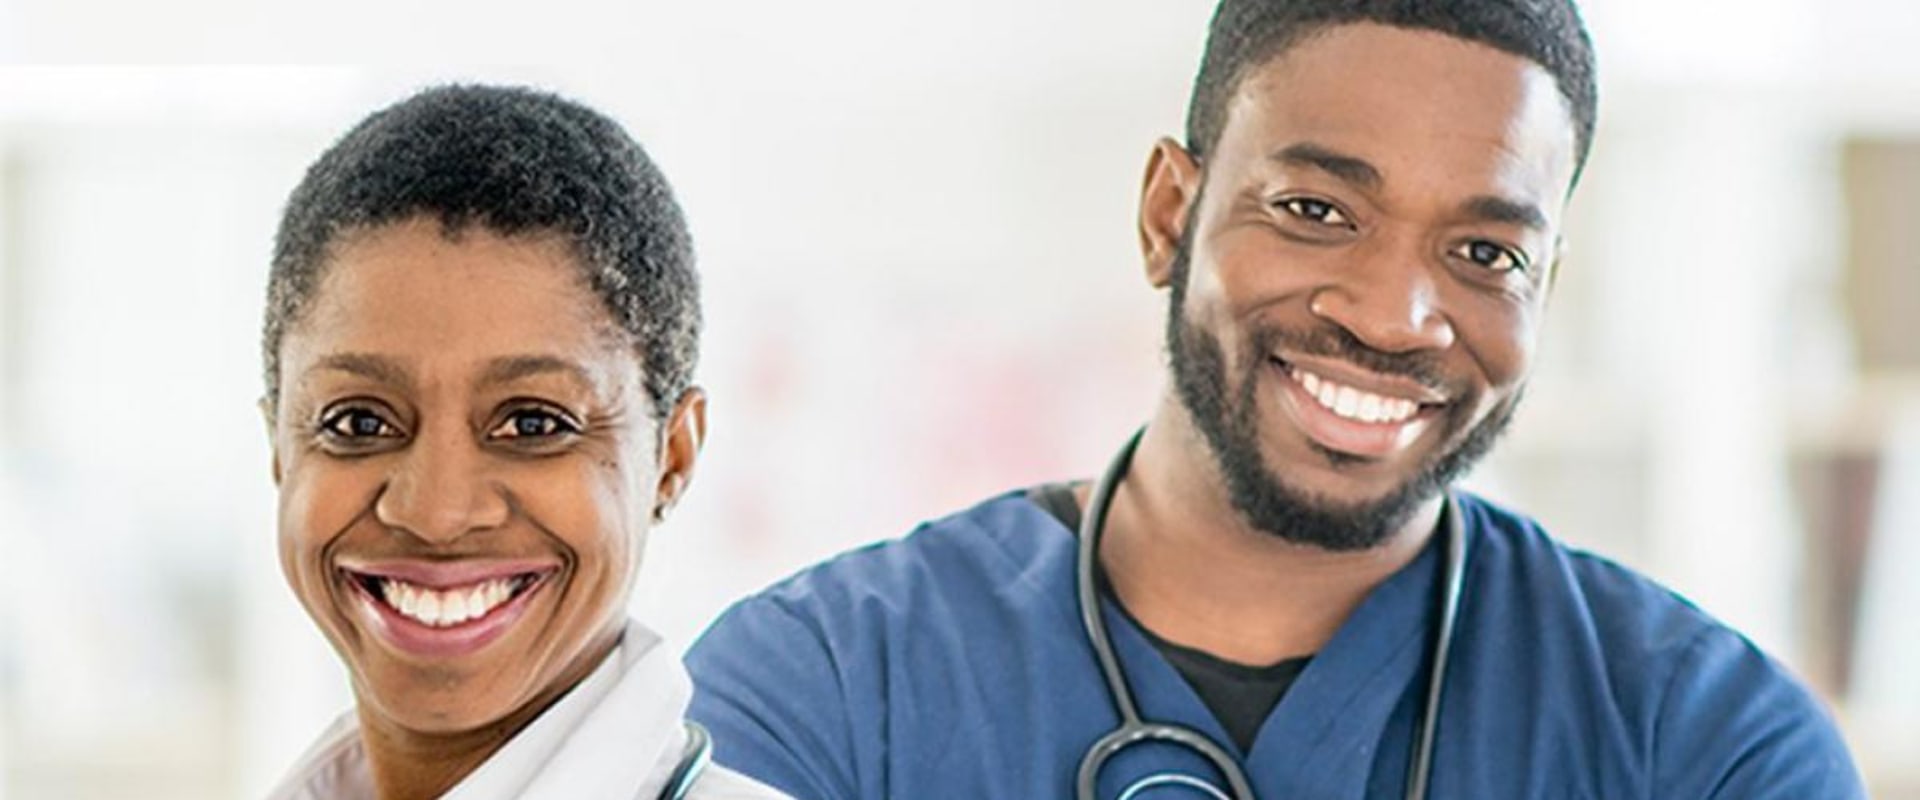 Finding Black Physicians in Your Area